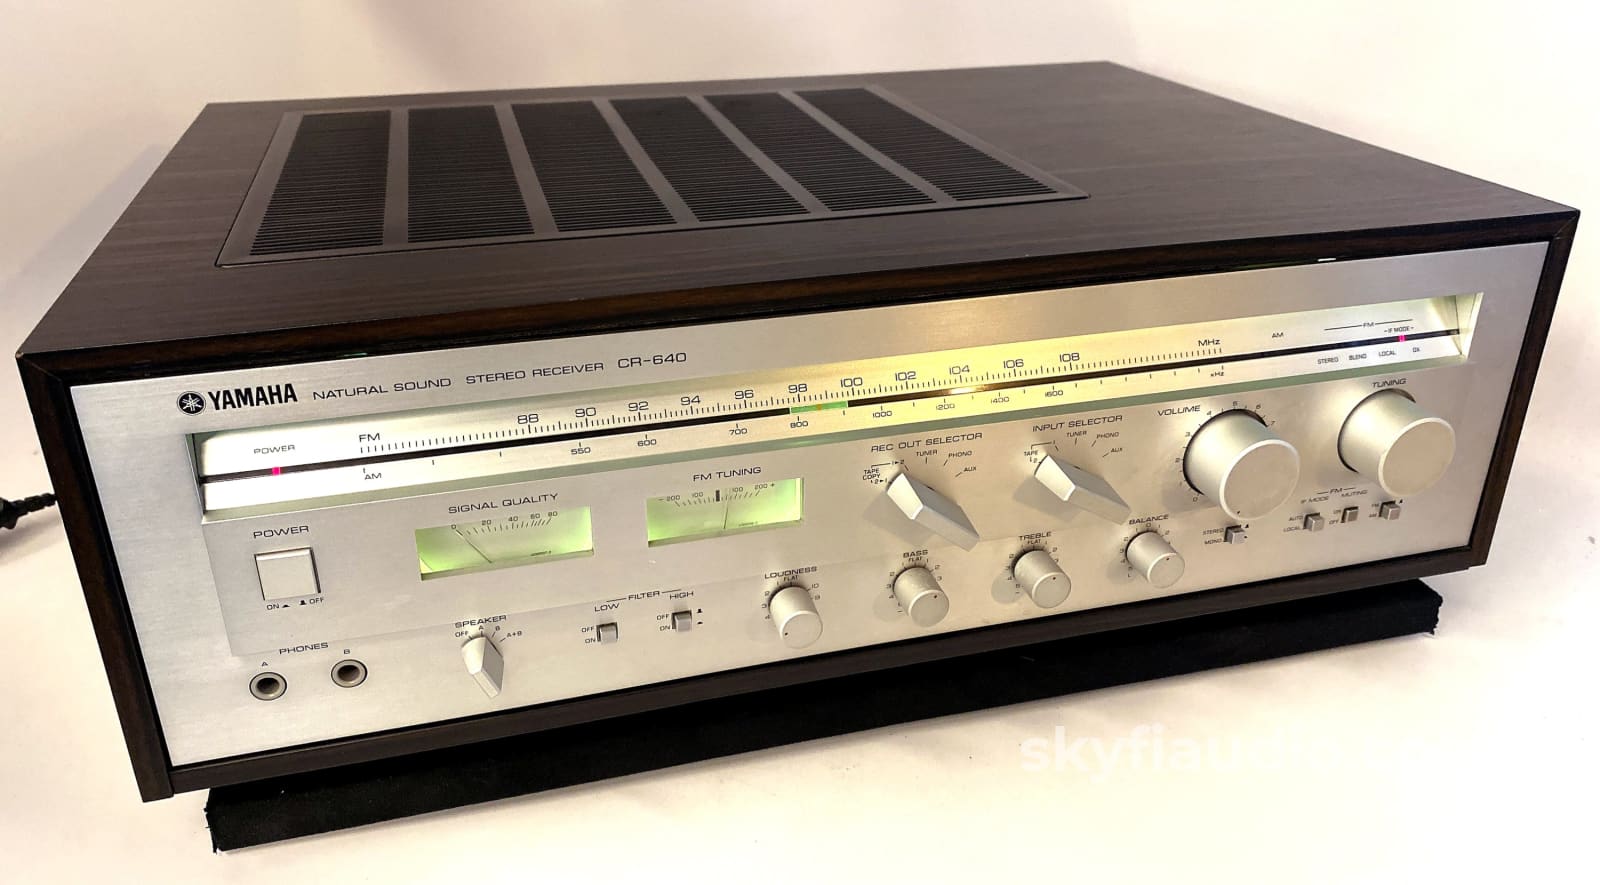 Yamaha Cr-640 Vintage Natural Sound Stereo Receiver Integrated Amplifier